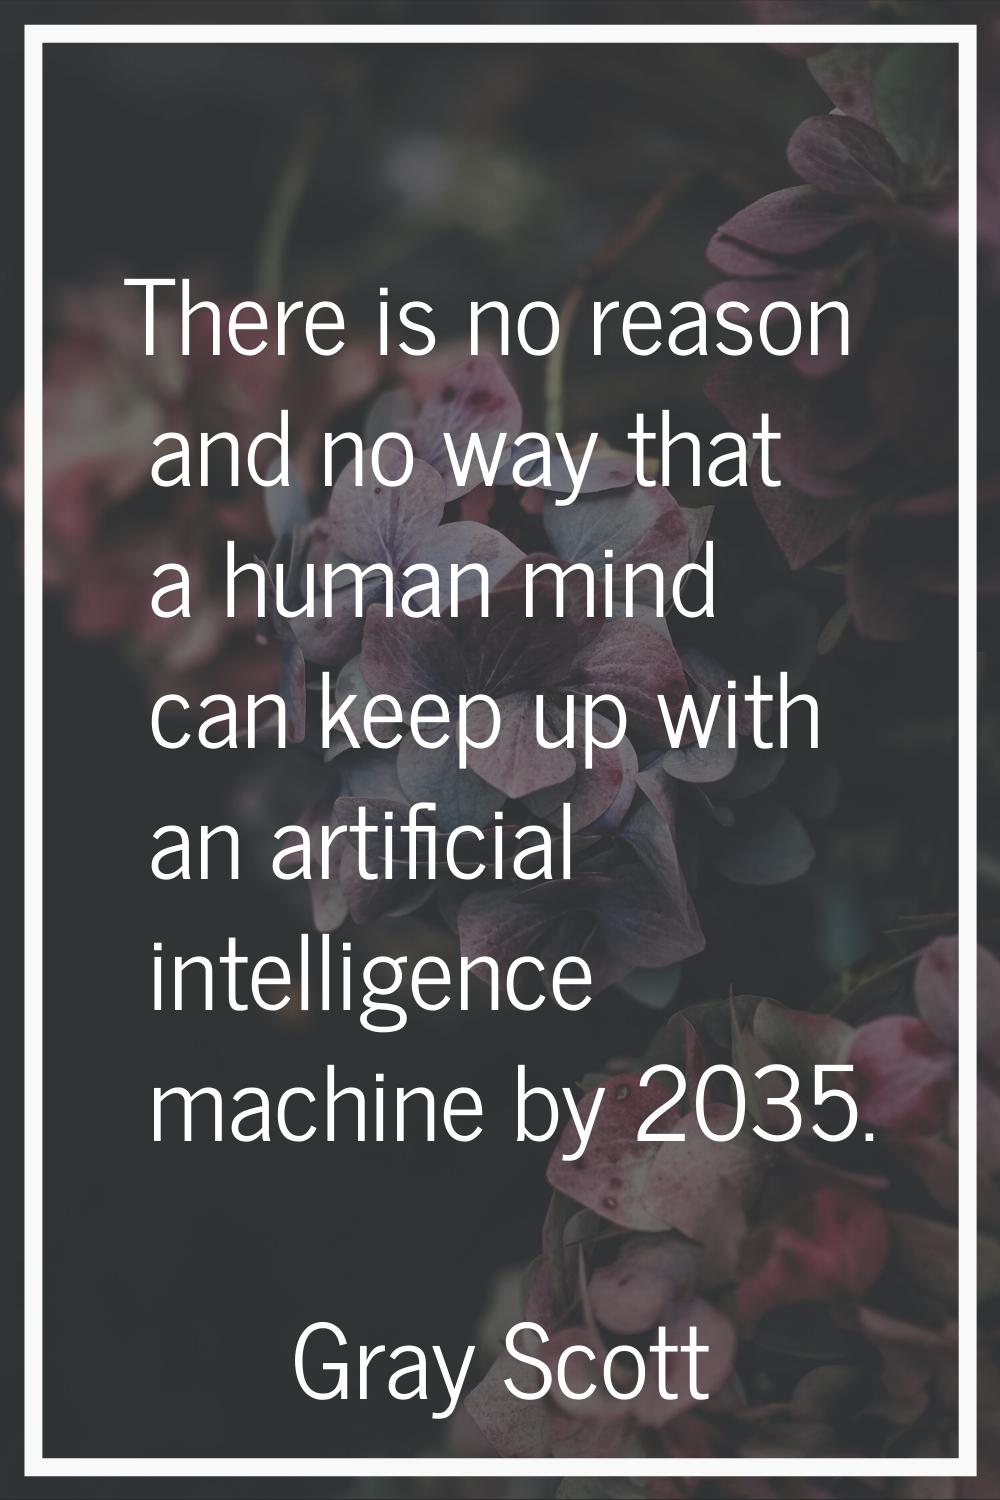 There is no reason and no way that a human mind can keep up with an artificial intelligence machine